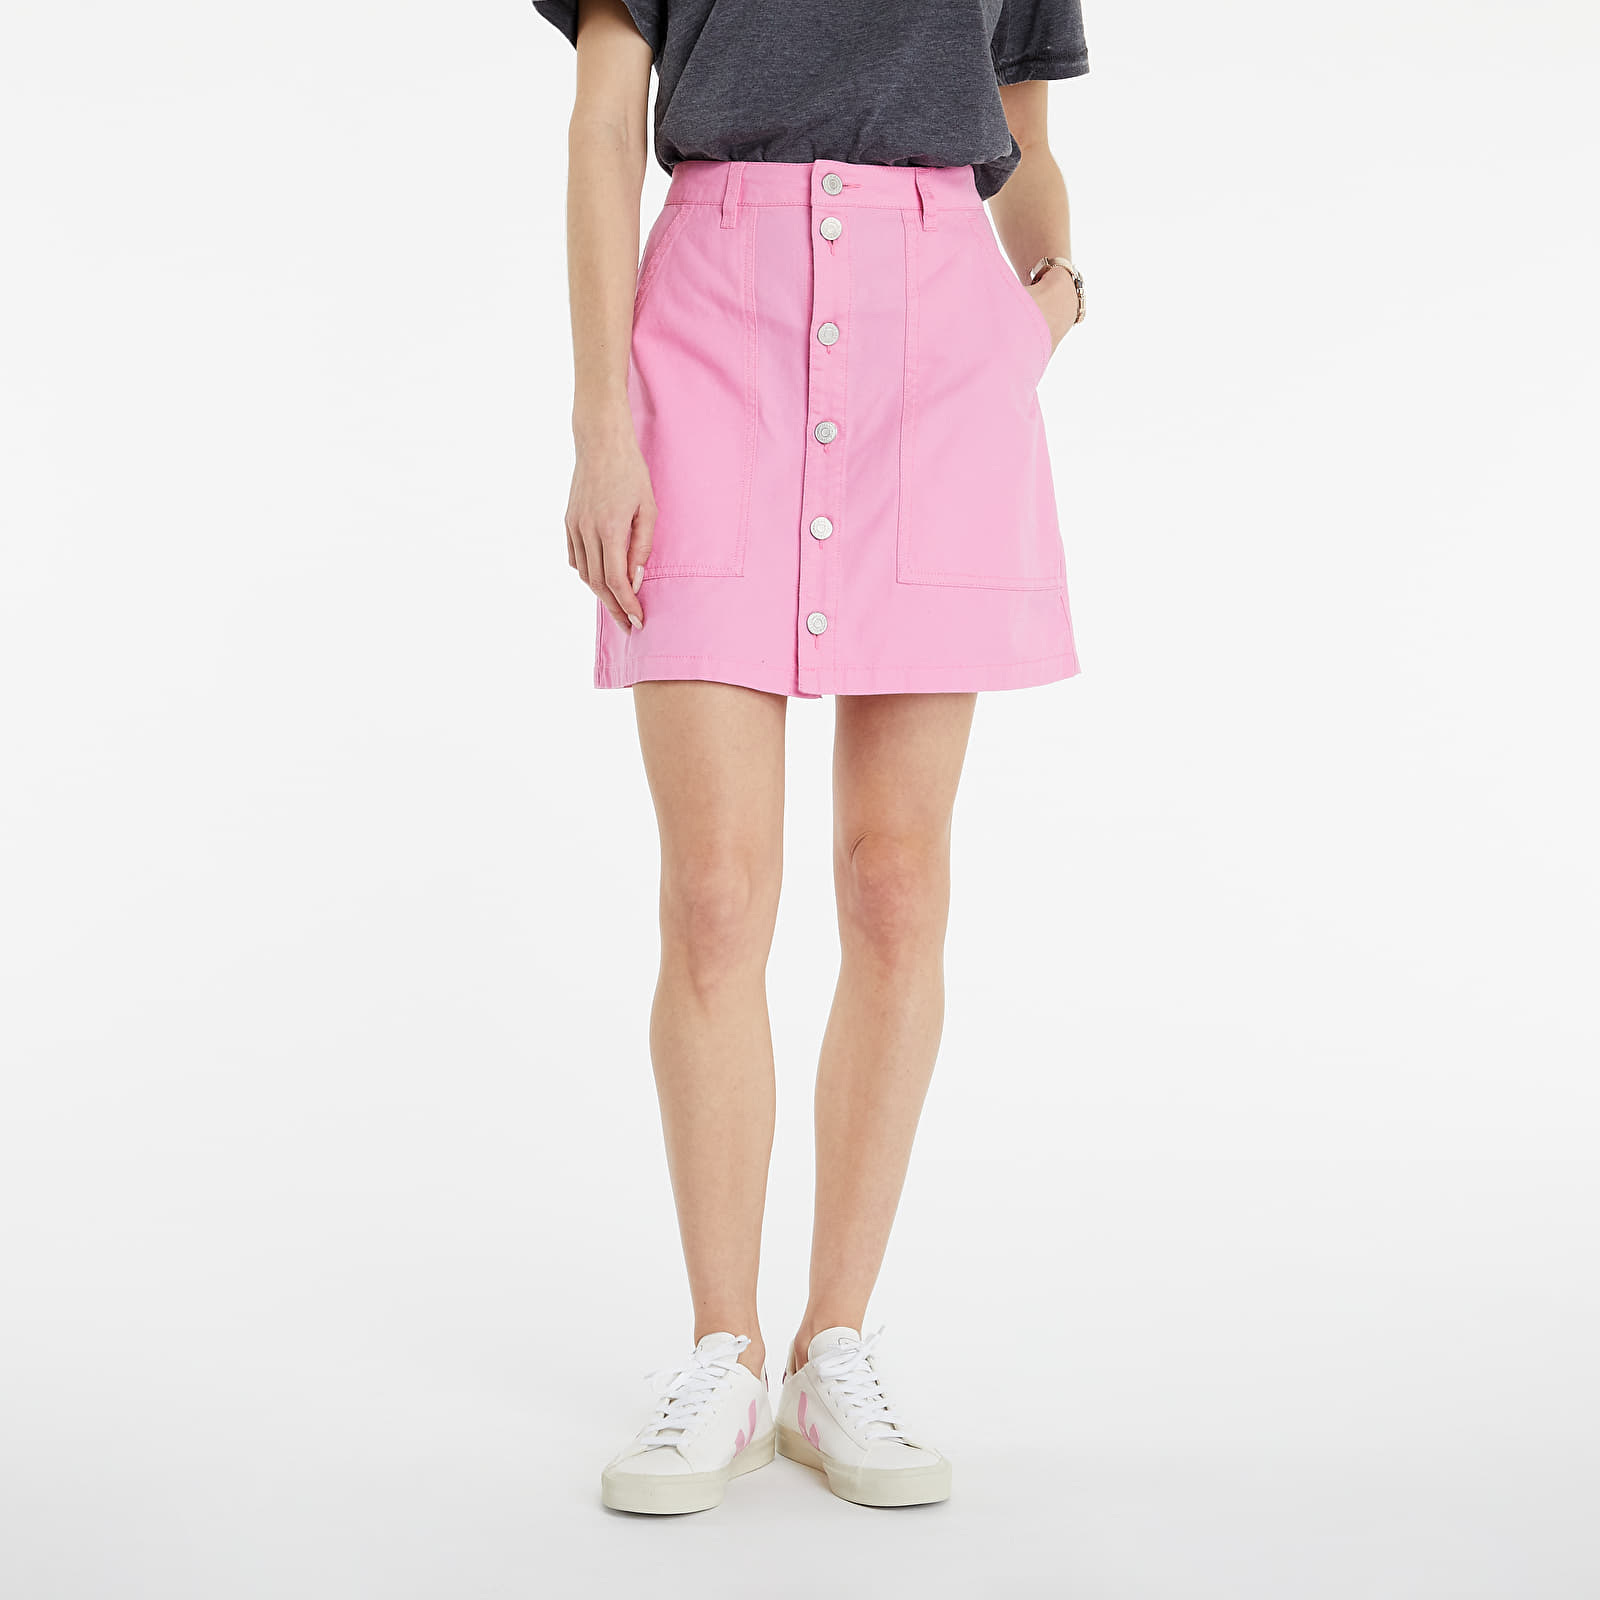 Through Badge | Button Jeans Pink Footshop Skirts Tommy Skirt